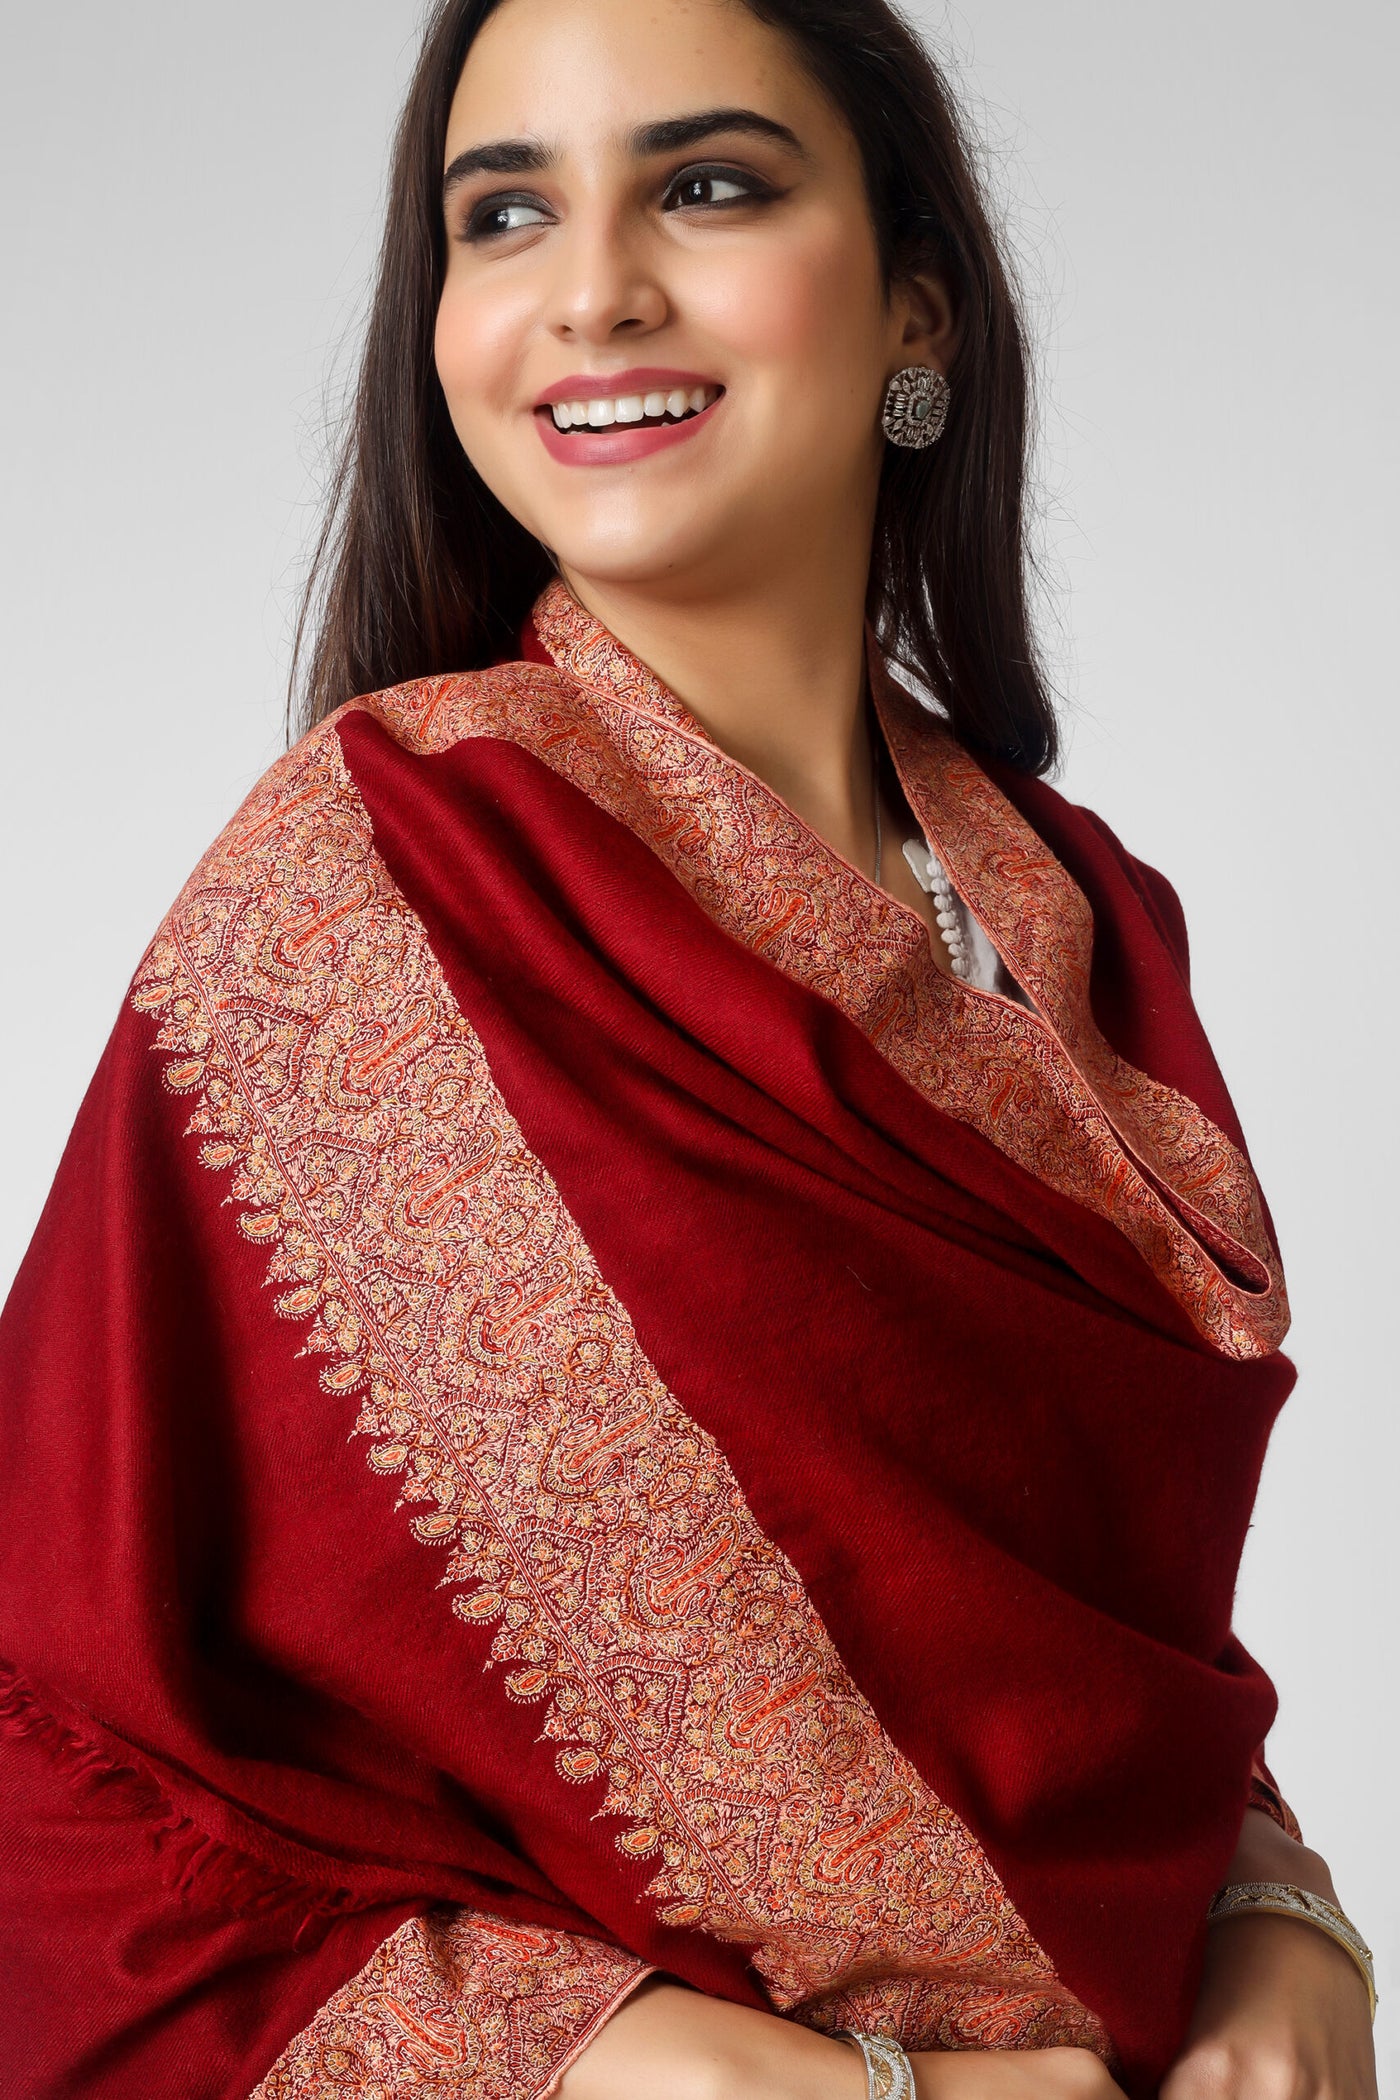 This bright maroon handmade Kashmiri pashmina shawl is made of the finest pashmina wool and has gorgeous Sozni embroidery done on all four sides in the conventional Dordaar pattern to wrap you in luxury. The shawl is enhanced by the delicate and exquisite needlework, which elevates its tradition.